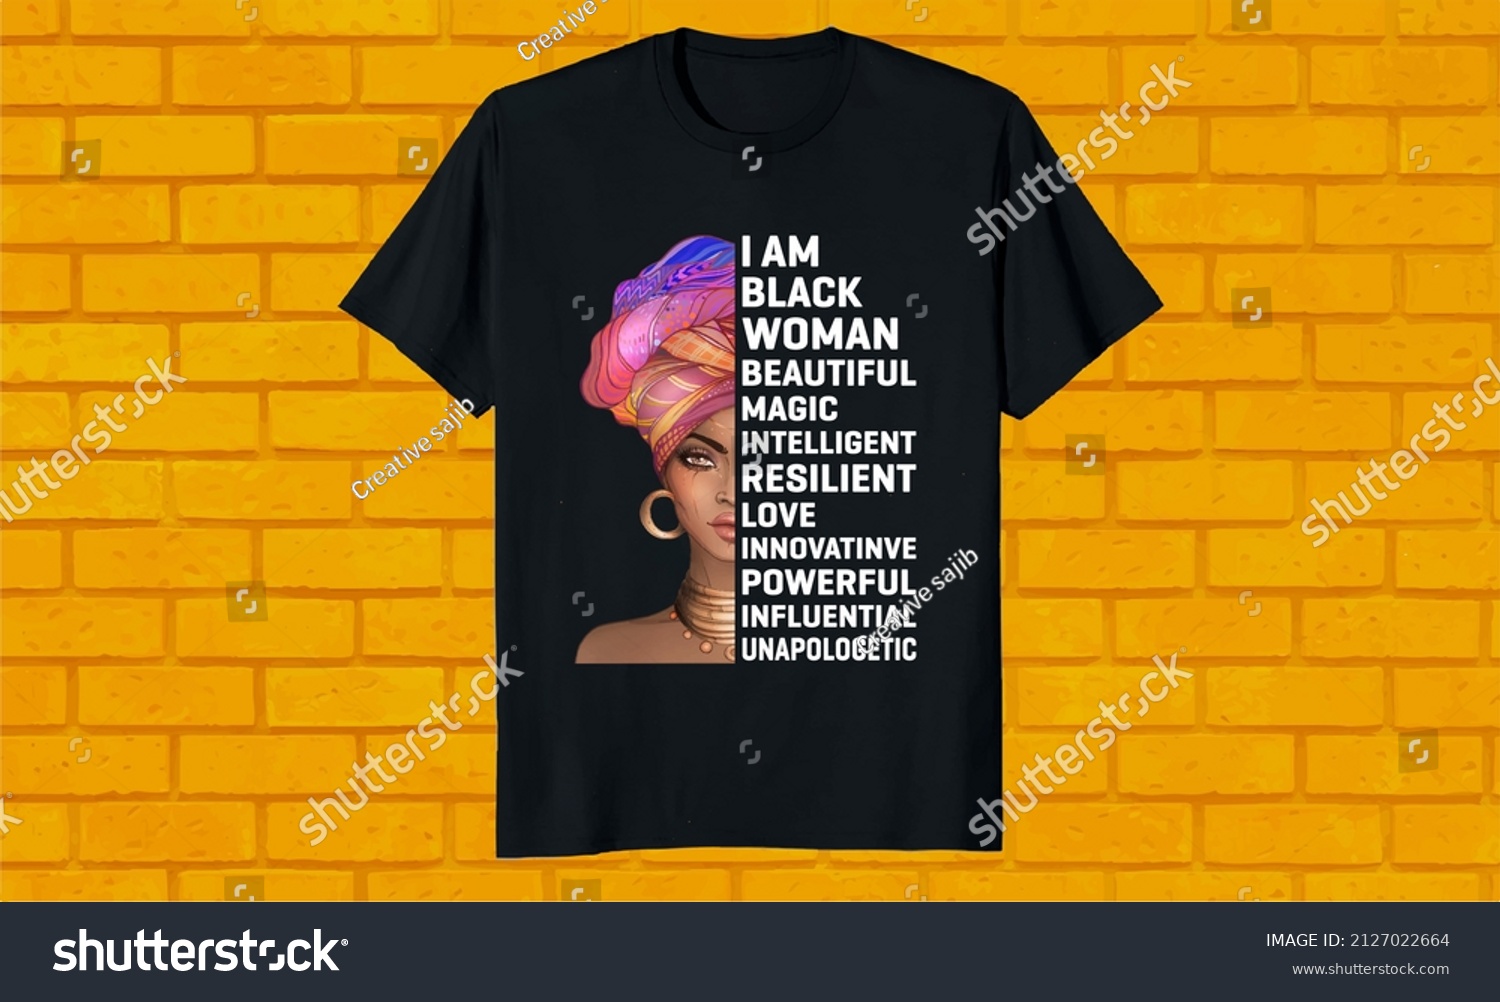 SVG of I am a woman beautiful magic intelligent love resilient - Black history month T shirt design, American history month, vector illustration vantage retro T-Shirt design for print ready vector format.  svg